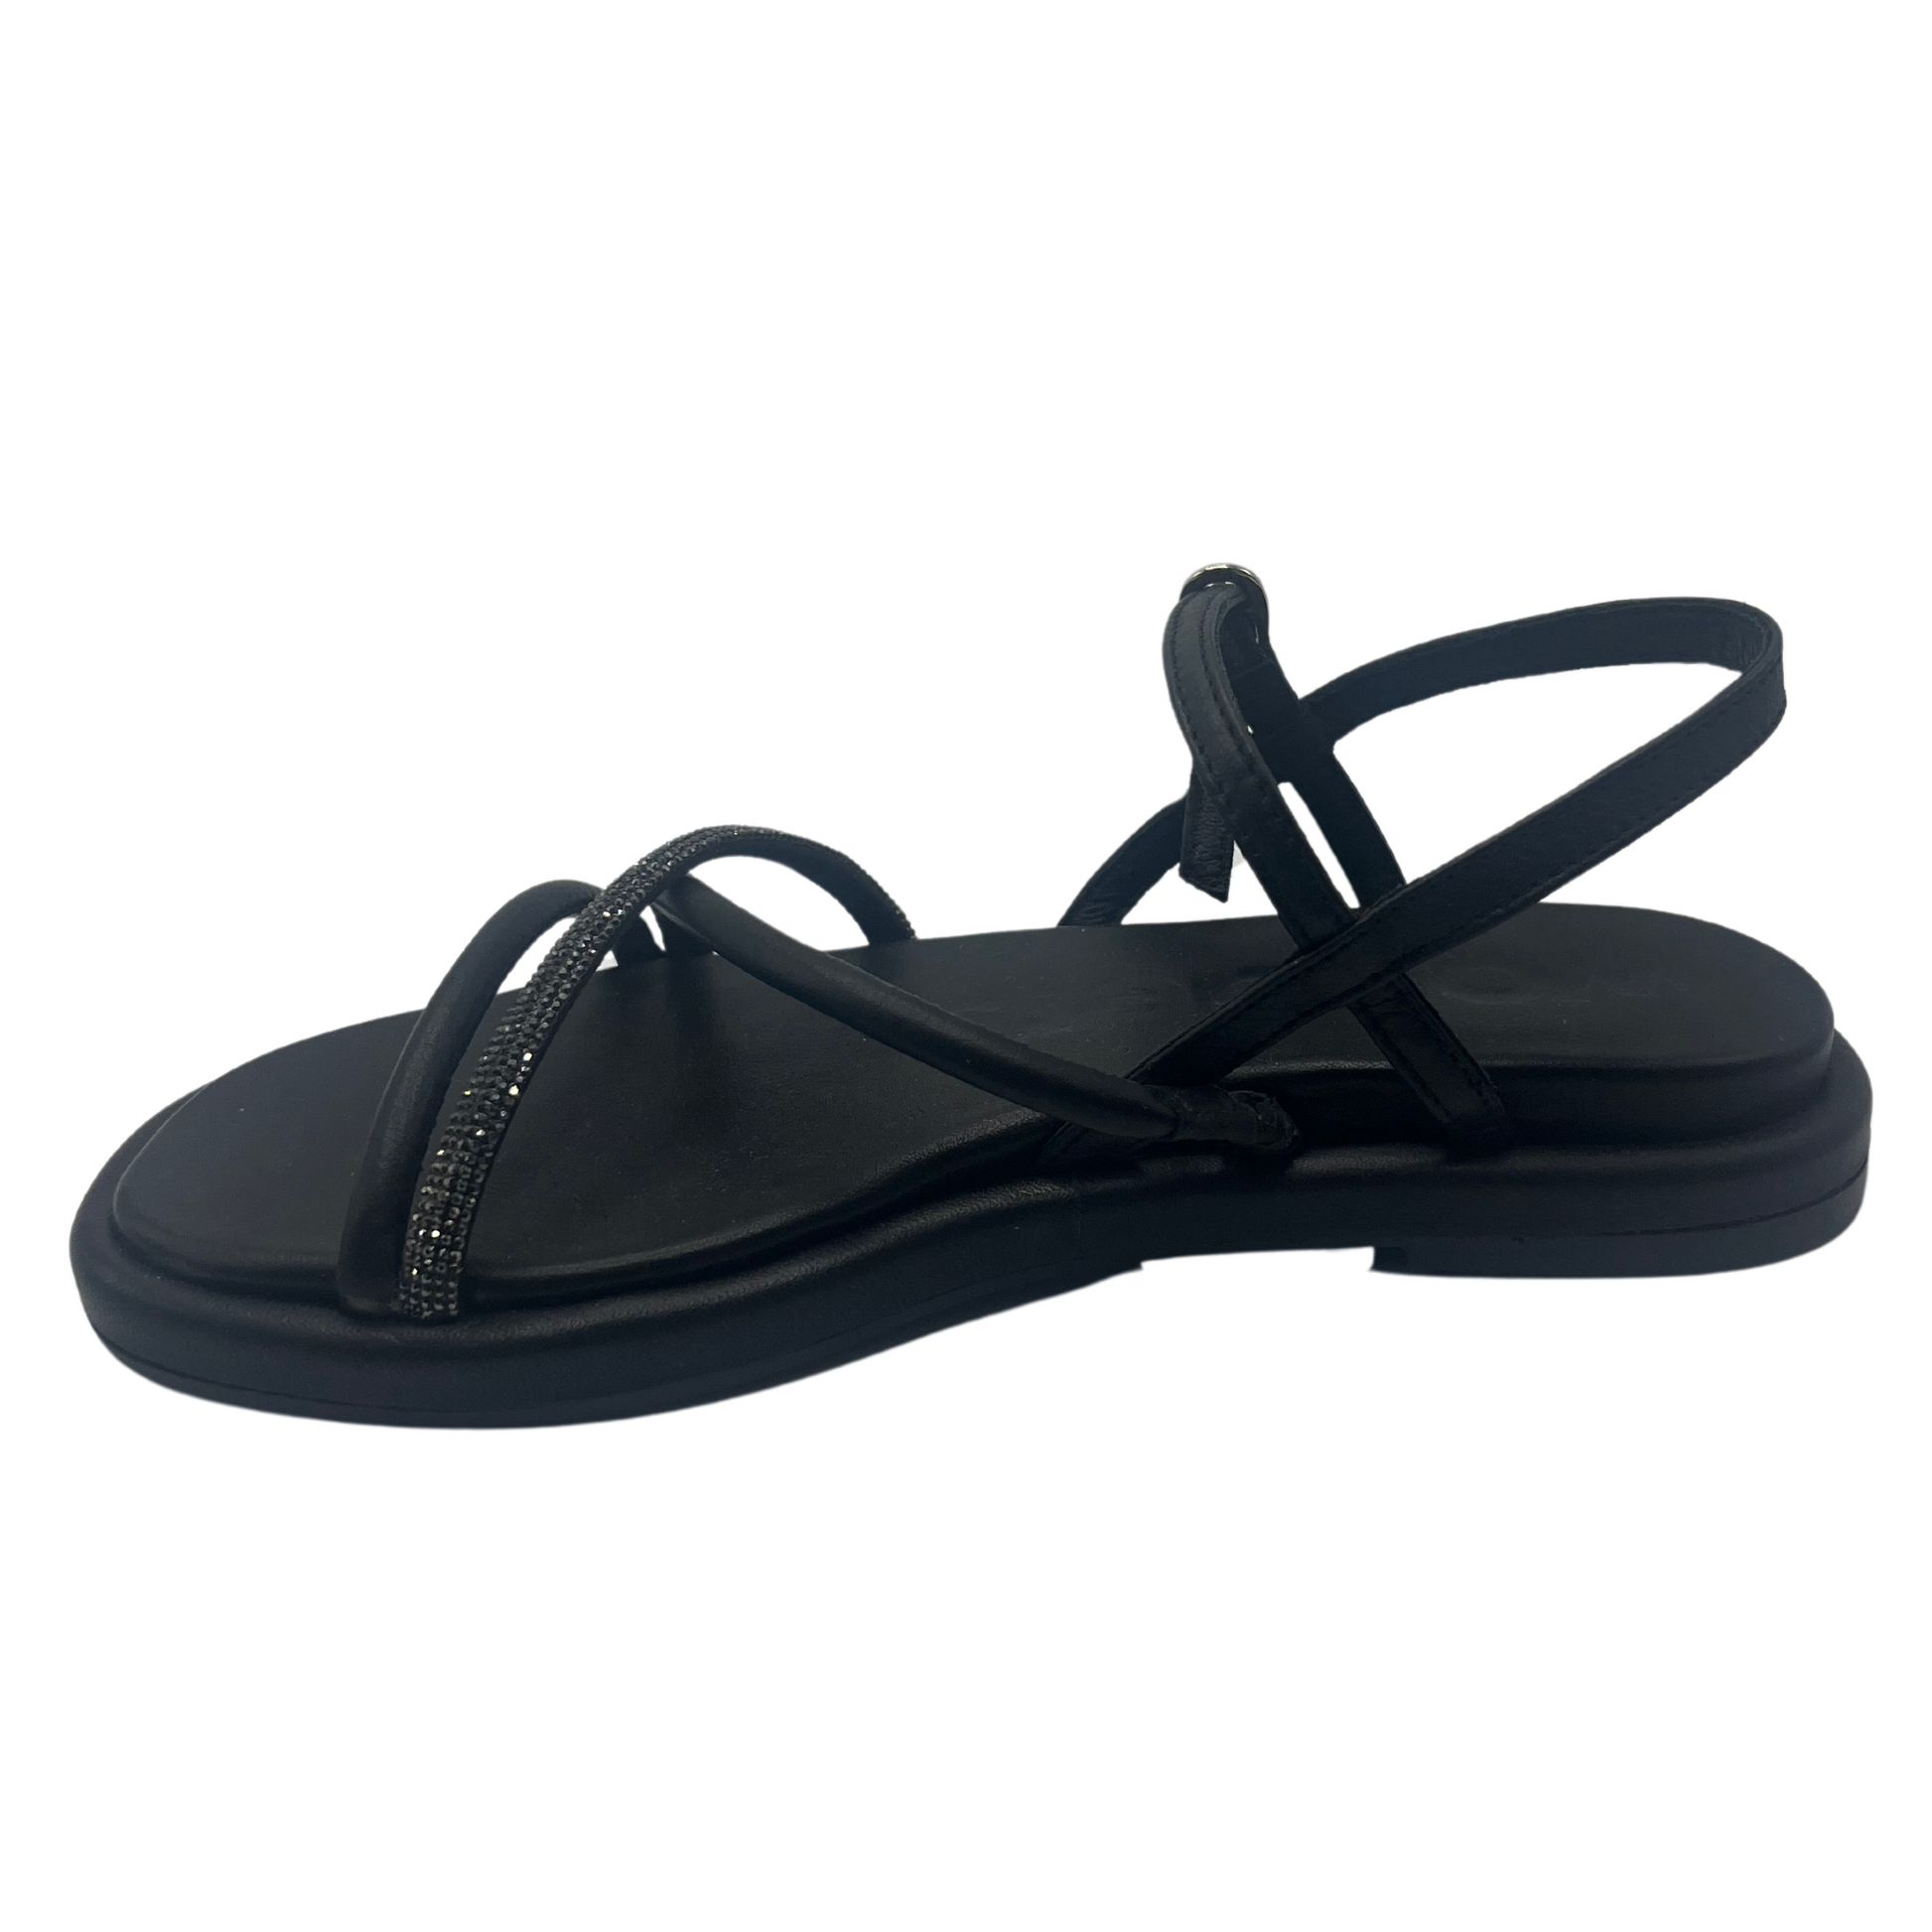 Left facing view of black leather sandal with padded sole, rhinestone detail and square toe